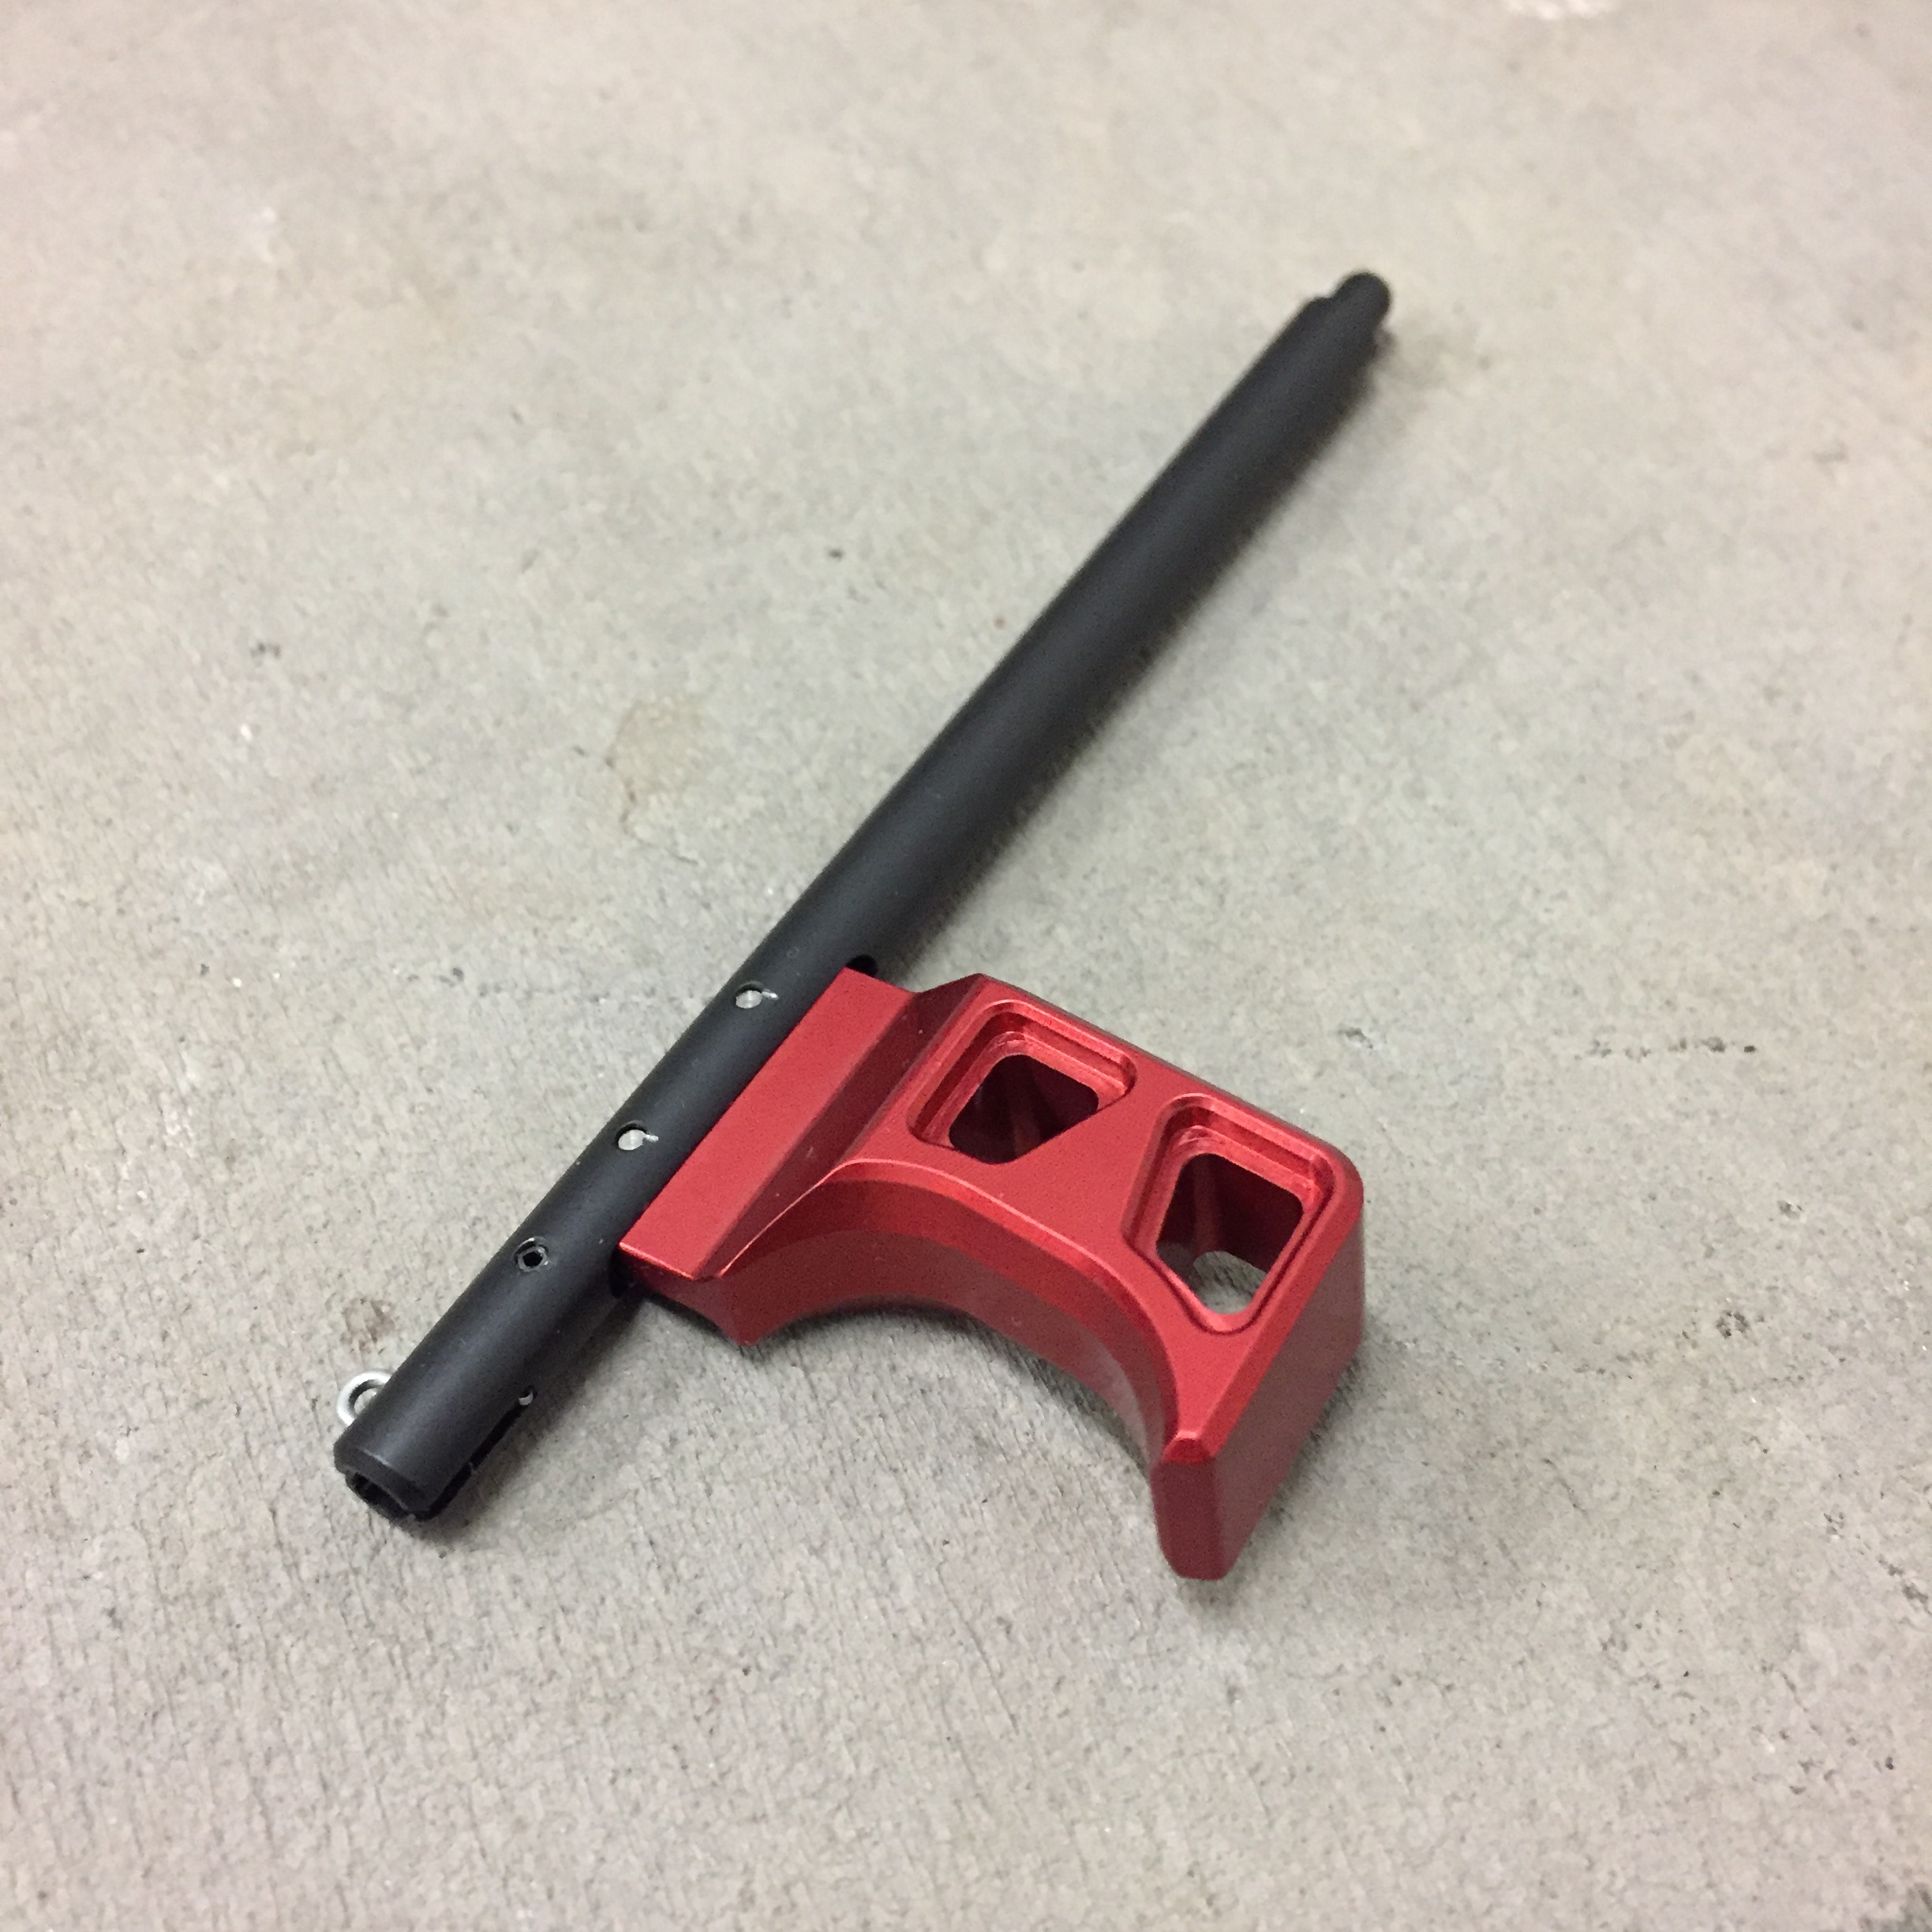 HB Industries CZ Scorpion EVO3 DELTA Extended Charging Handle (Red or Black) - Red